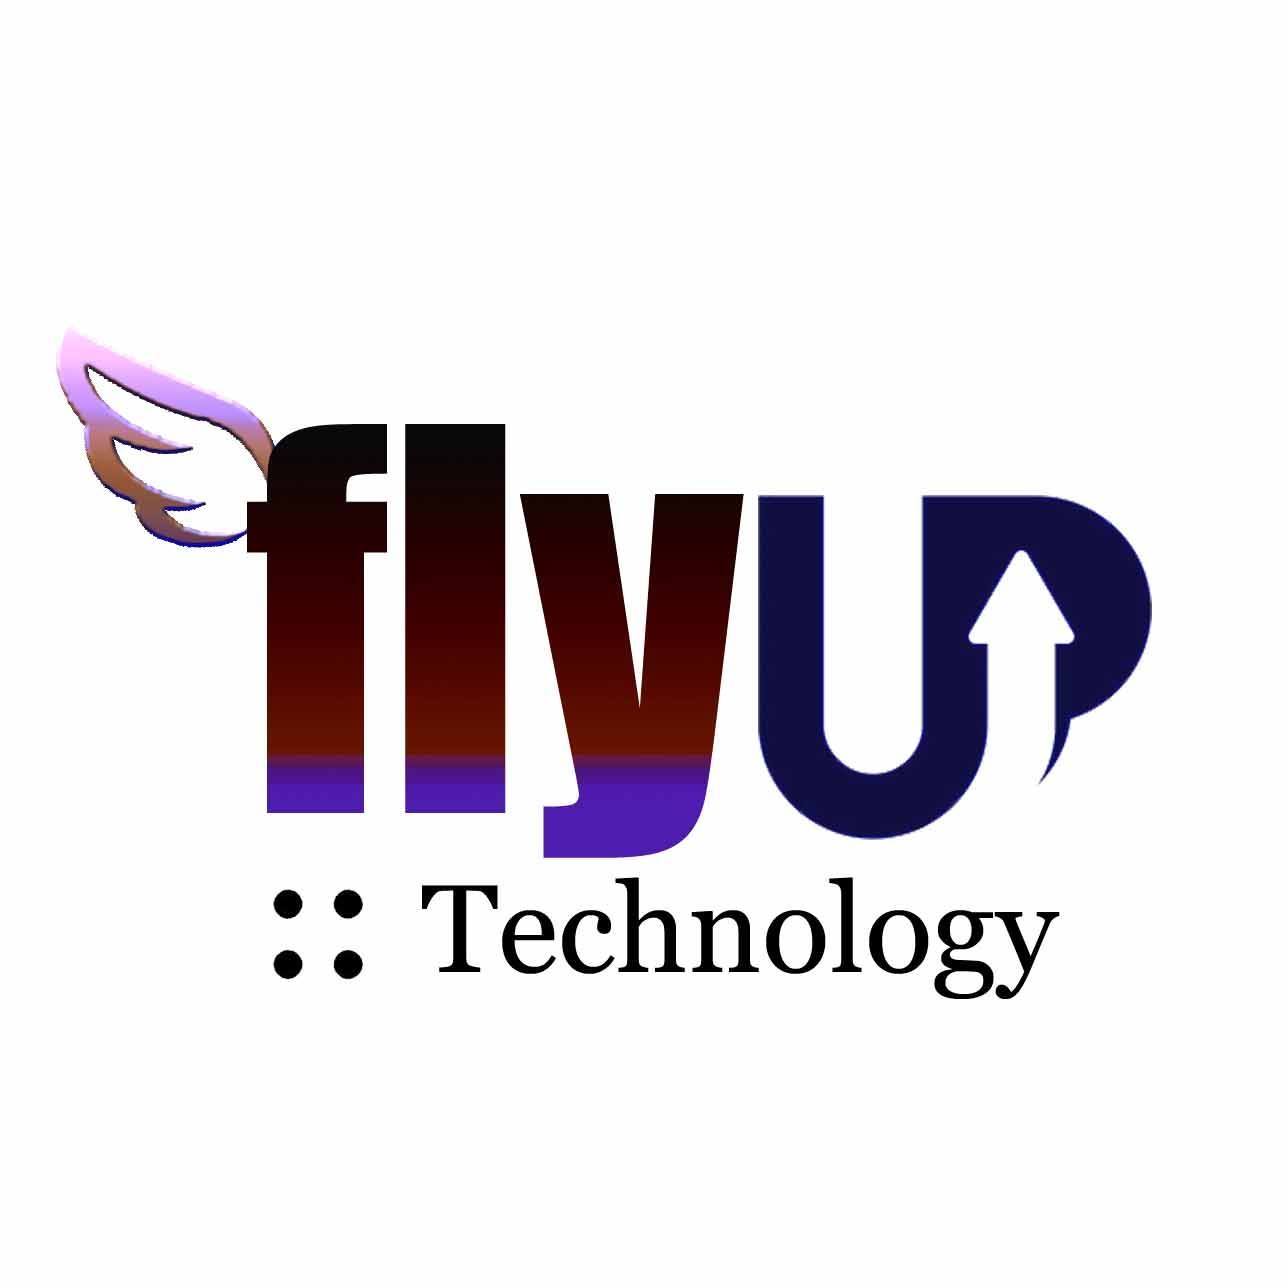 Fly Up Technology